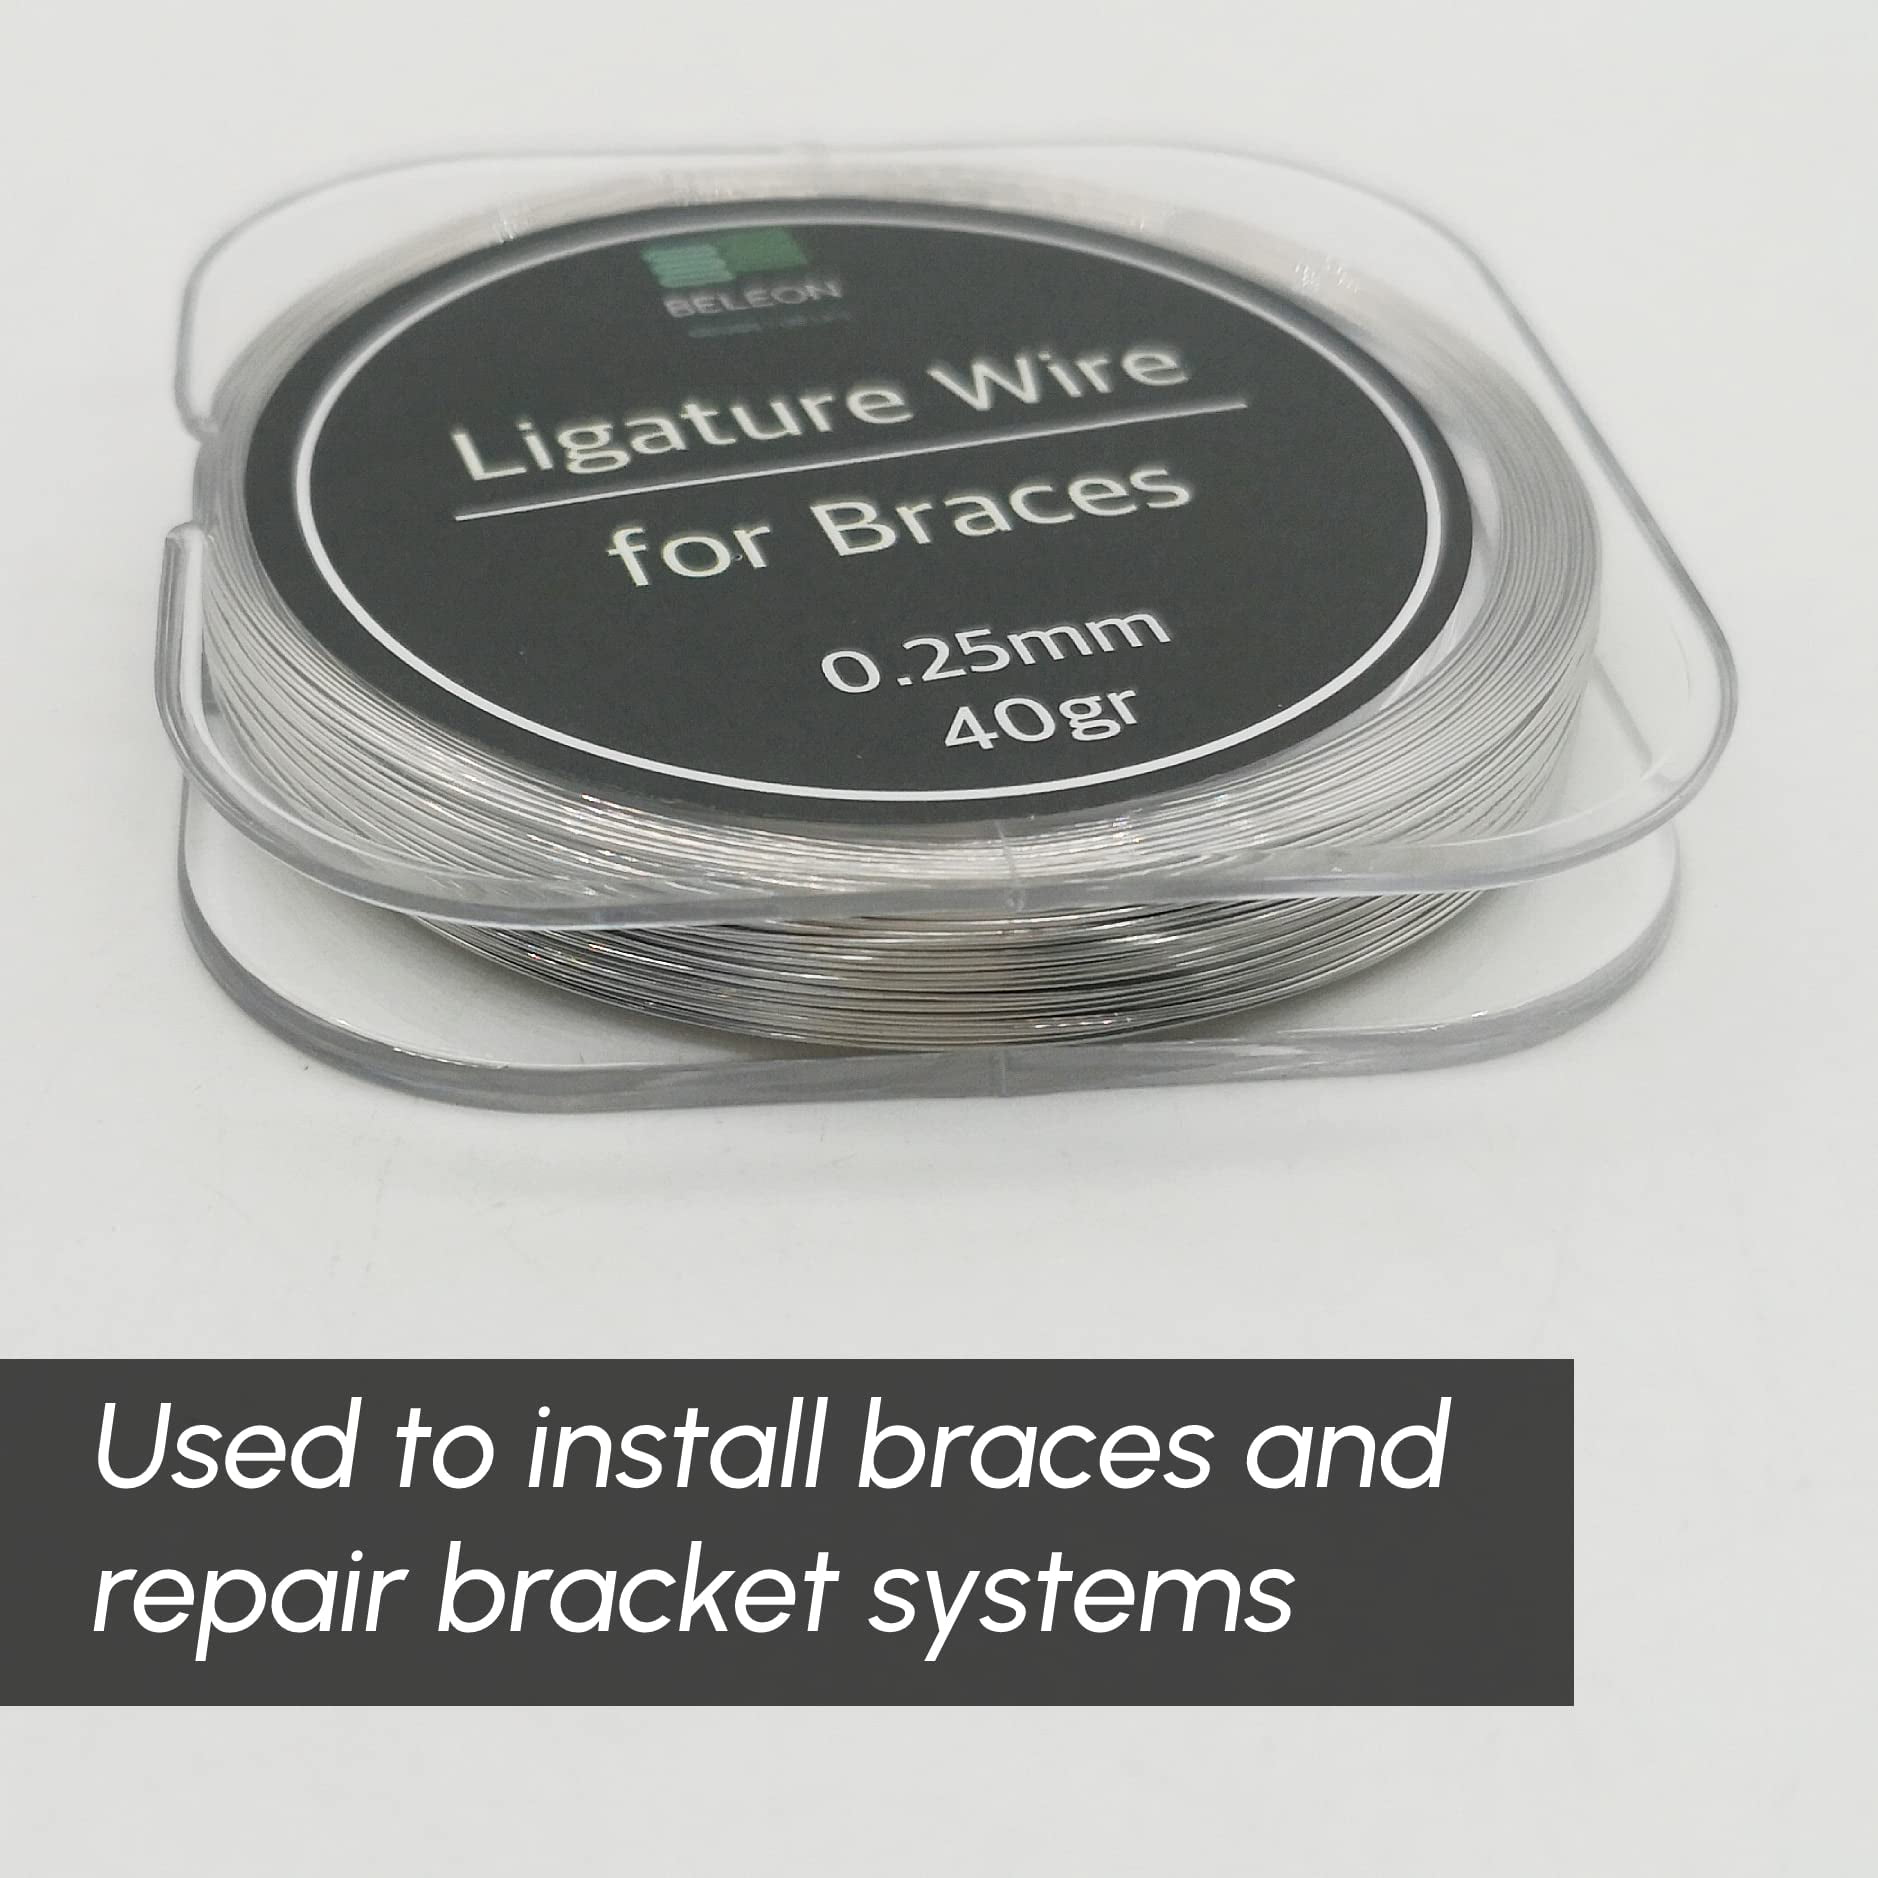 Braces Wire Orthodontic GP27 Dental Ligature Wire for Braces for Home  Use Stainless Steel 40g 0.25mm 